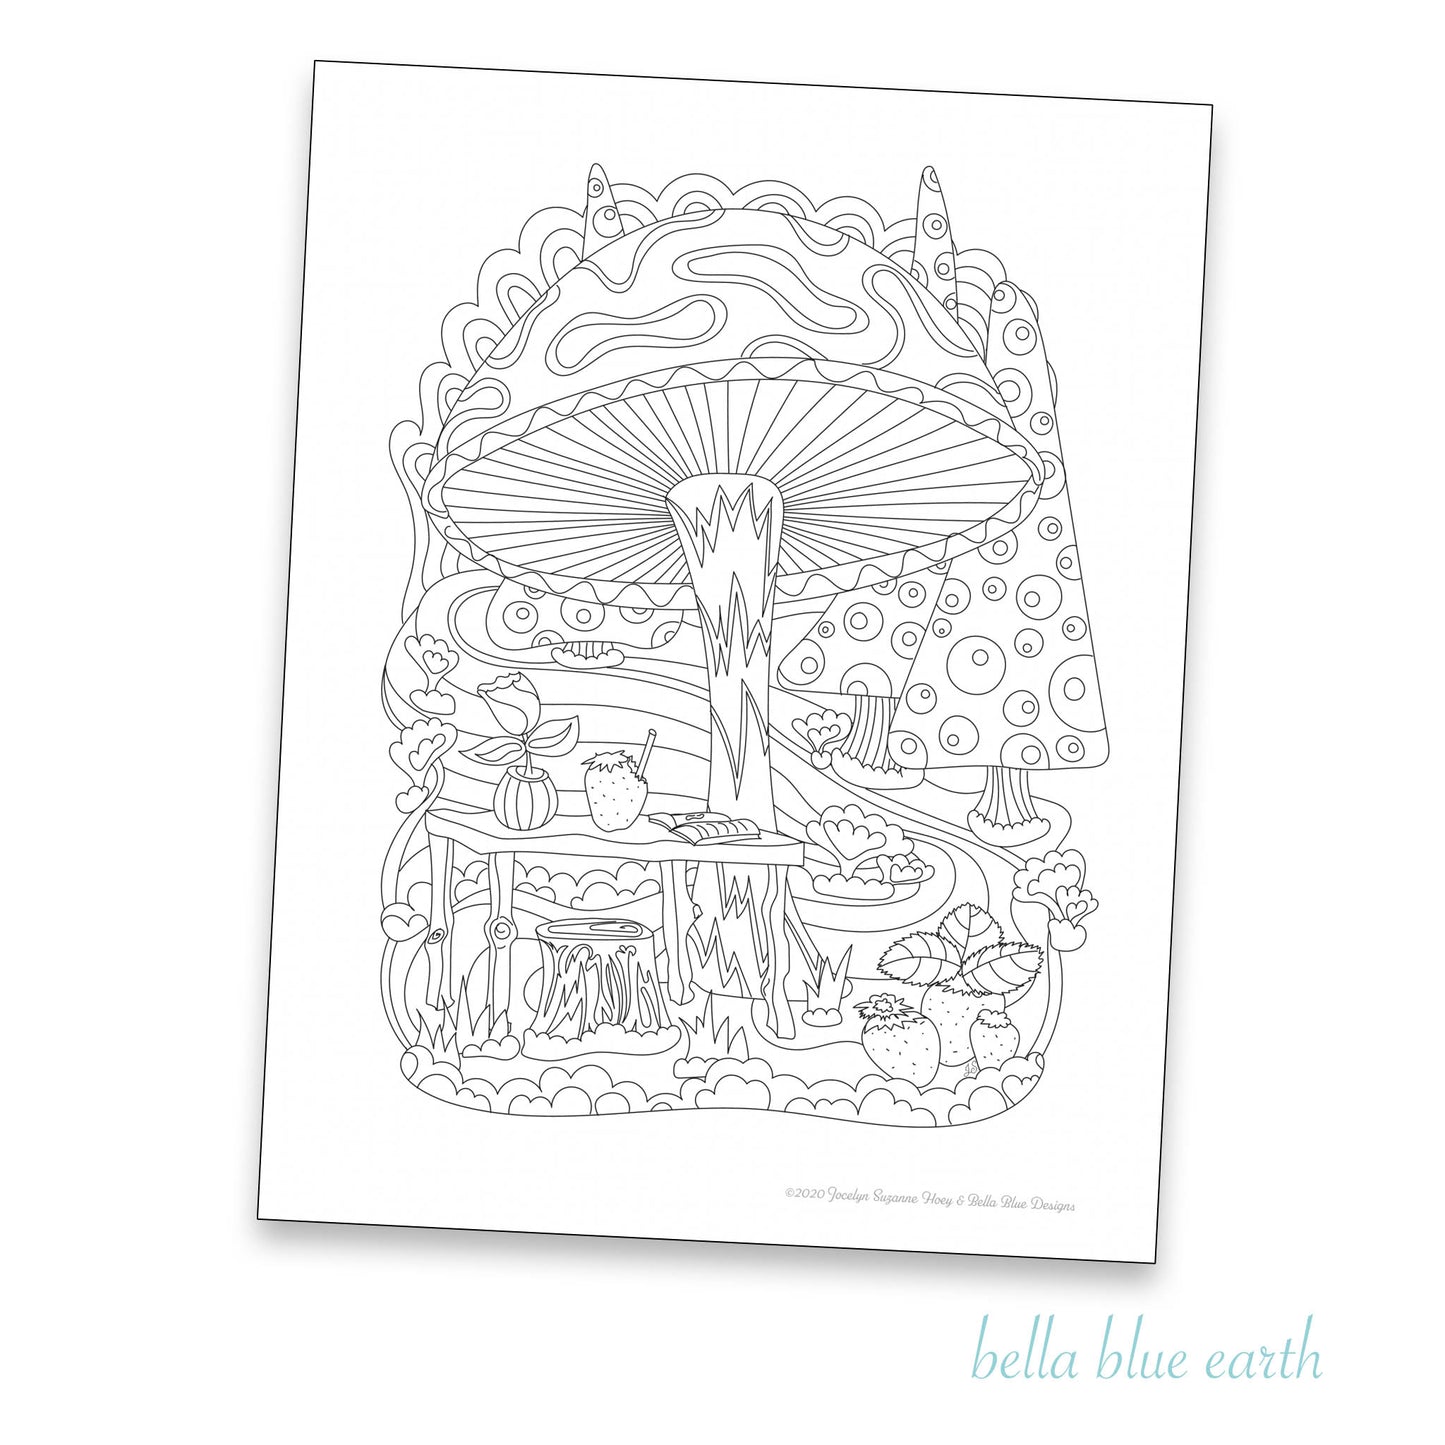 digital design for coloring book for downloading which shows a mushroom in a farm scene for coloring